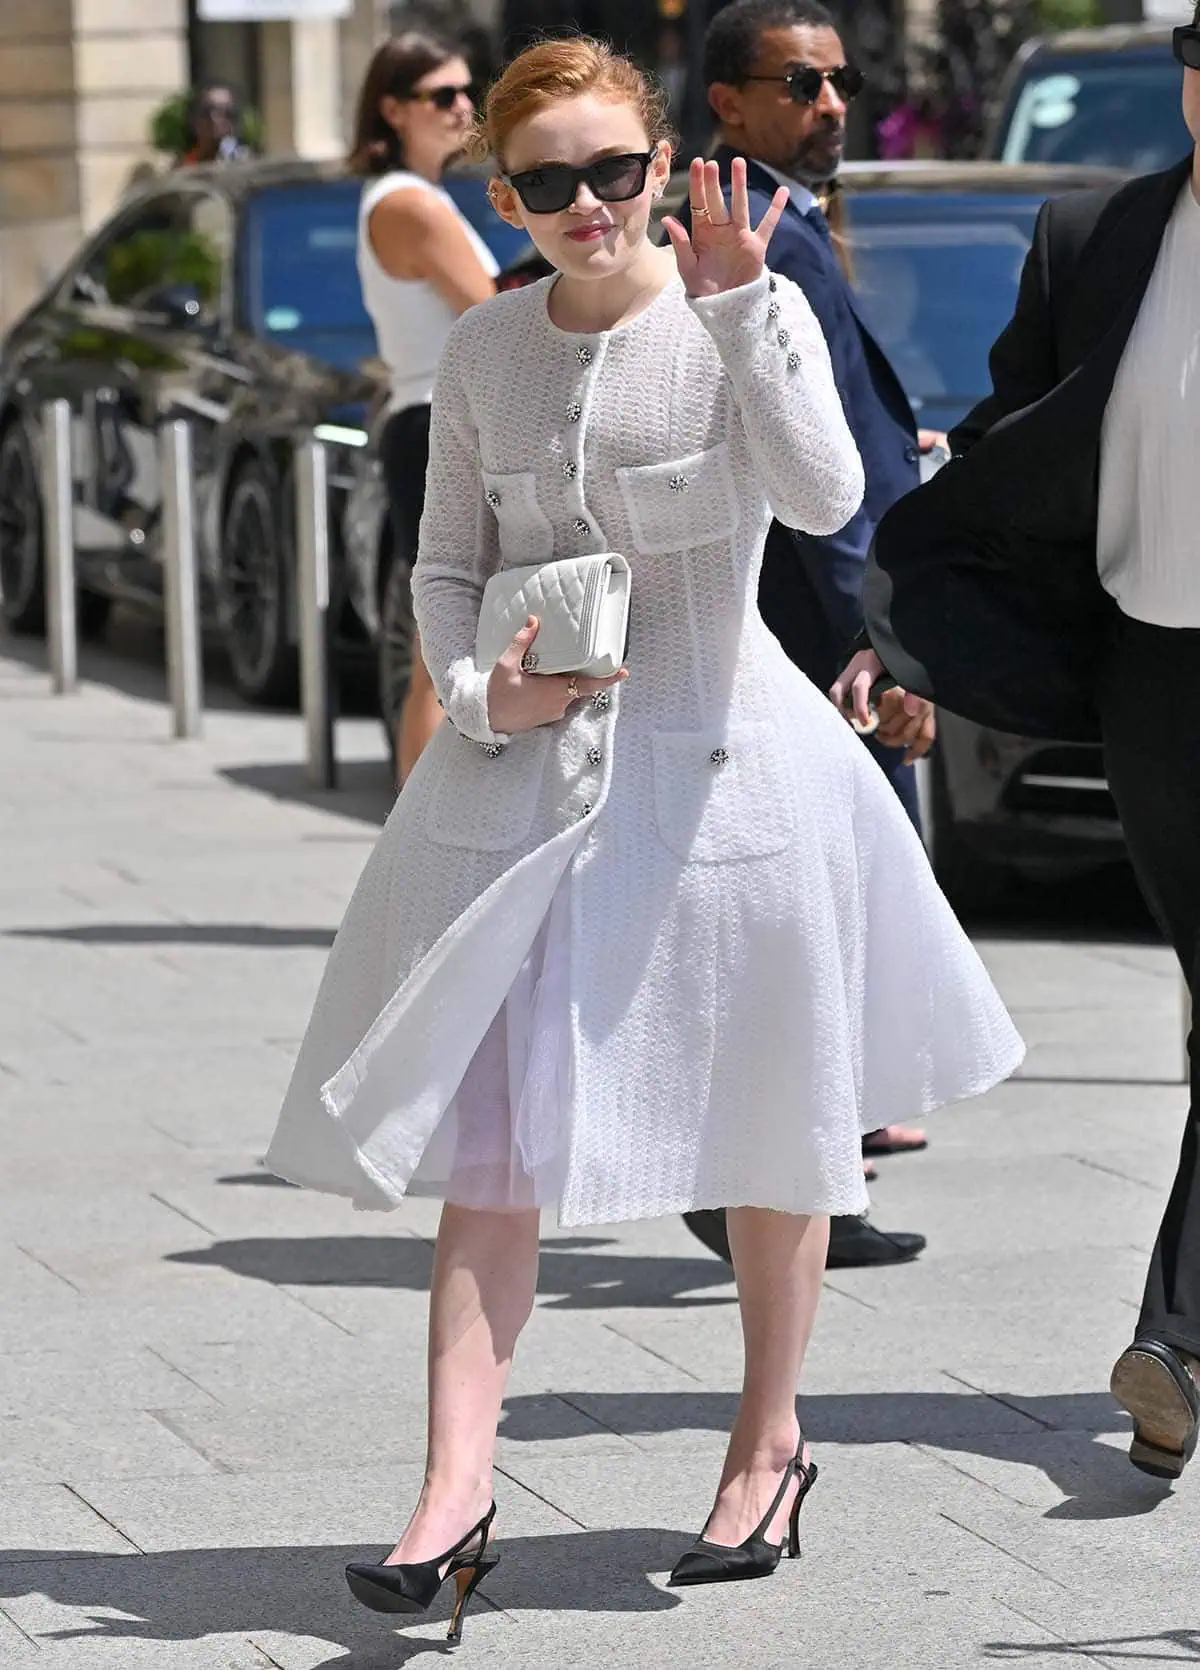 Sadie Sink exudes elegance in a white Chanel A-line dress featuring a fitted long-sleeved bodice and a structured skirt with a petticoat at Chanel's Paris Fashion Week presentation